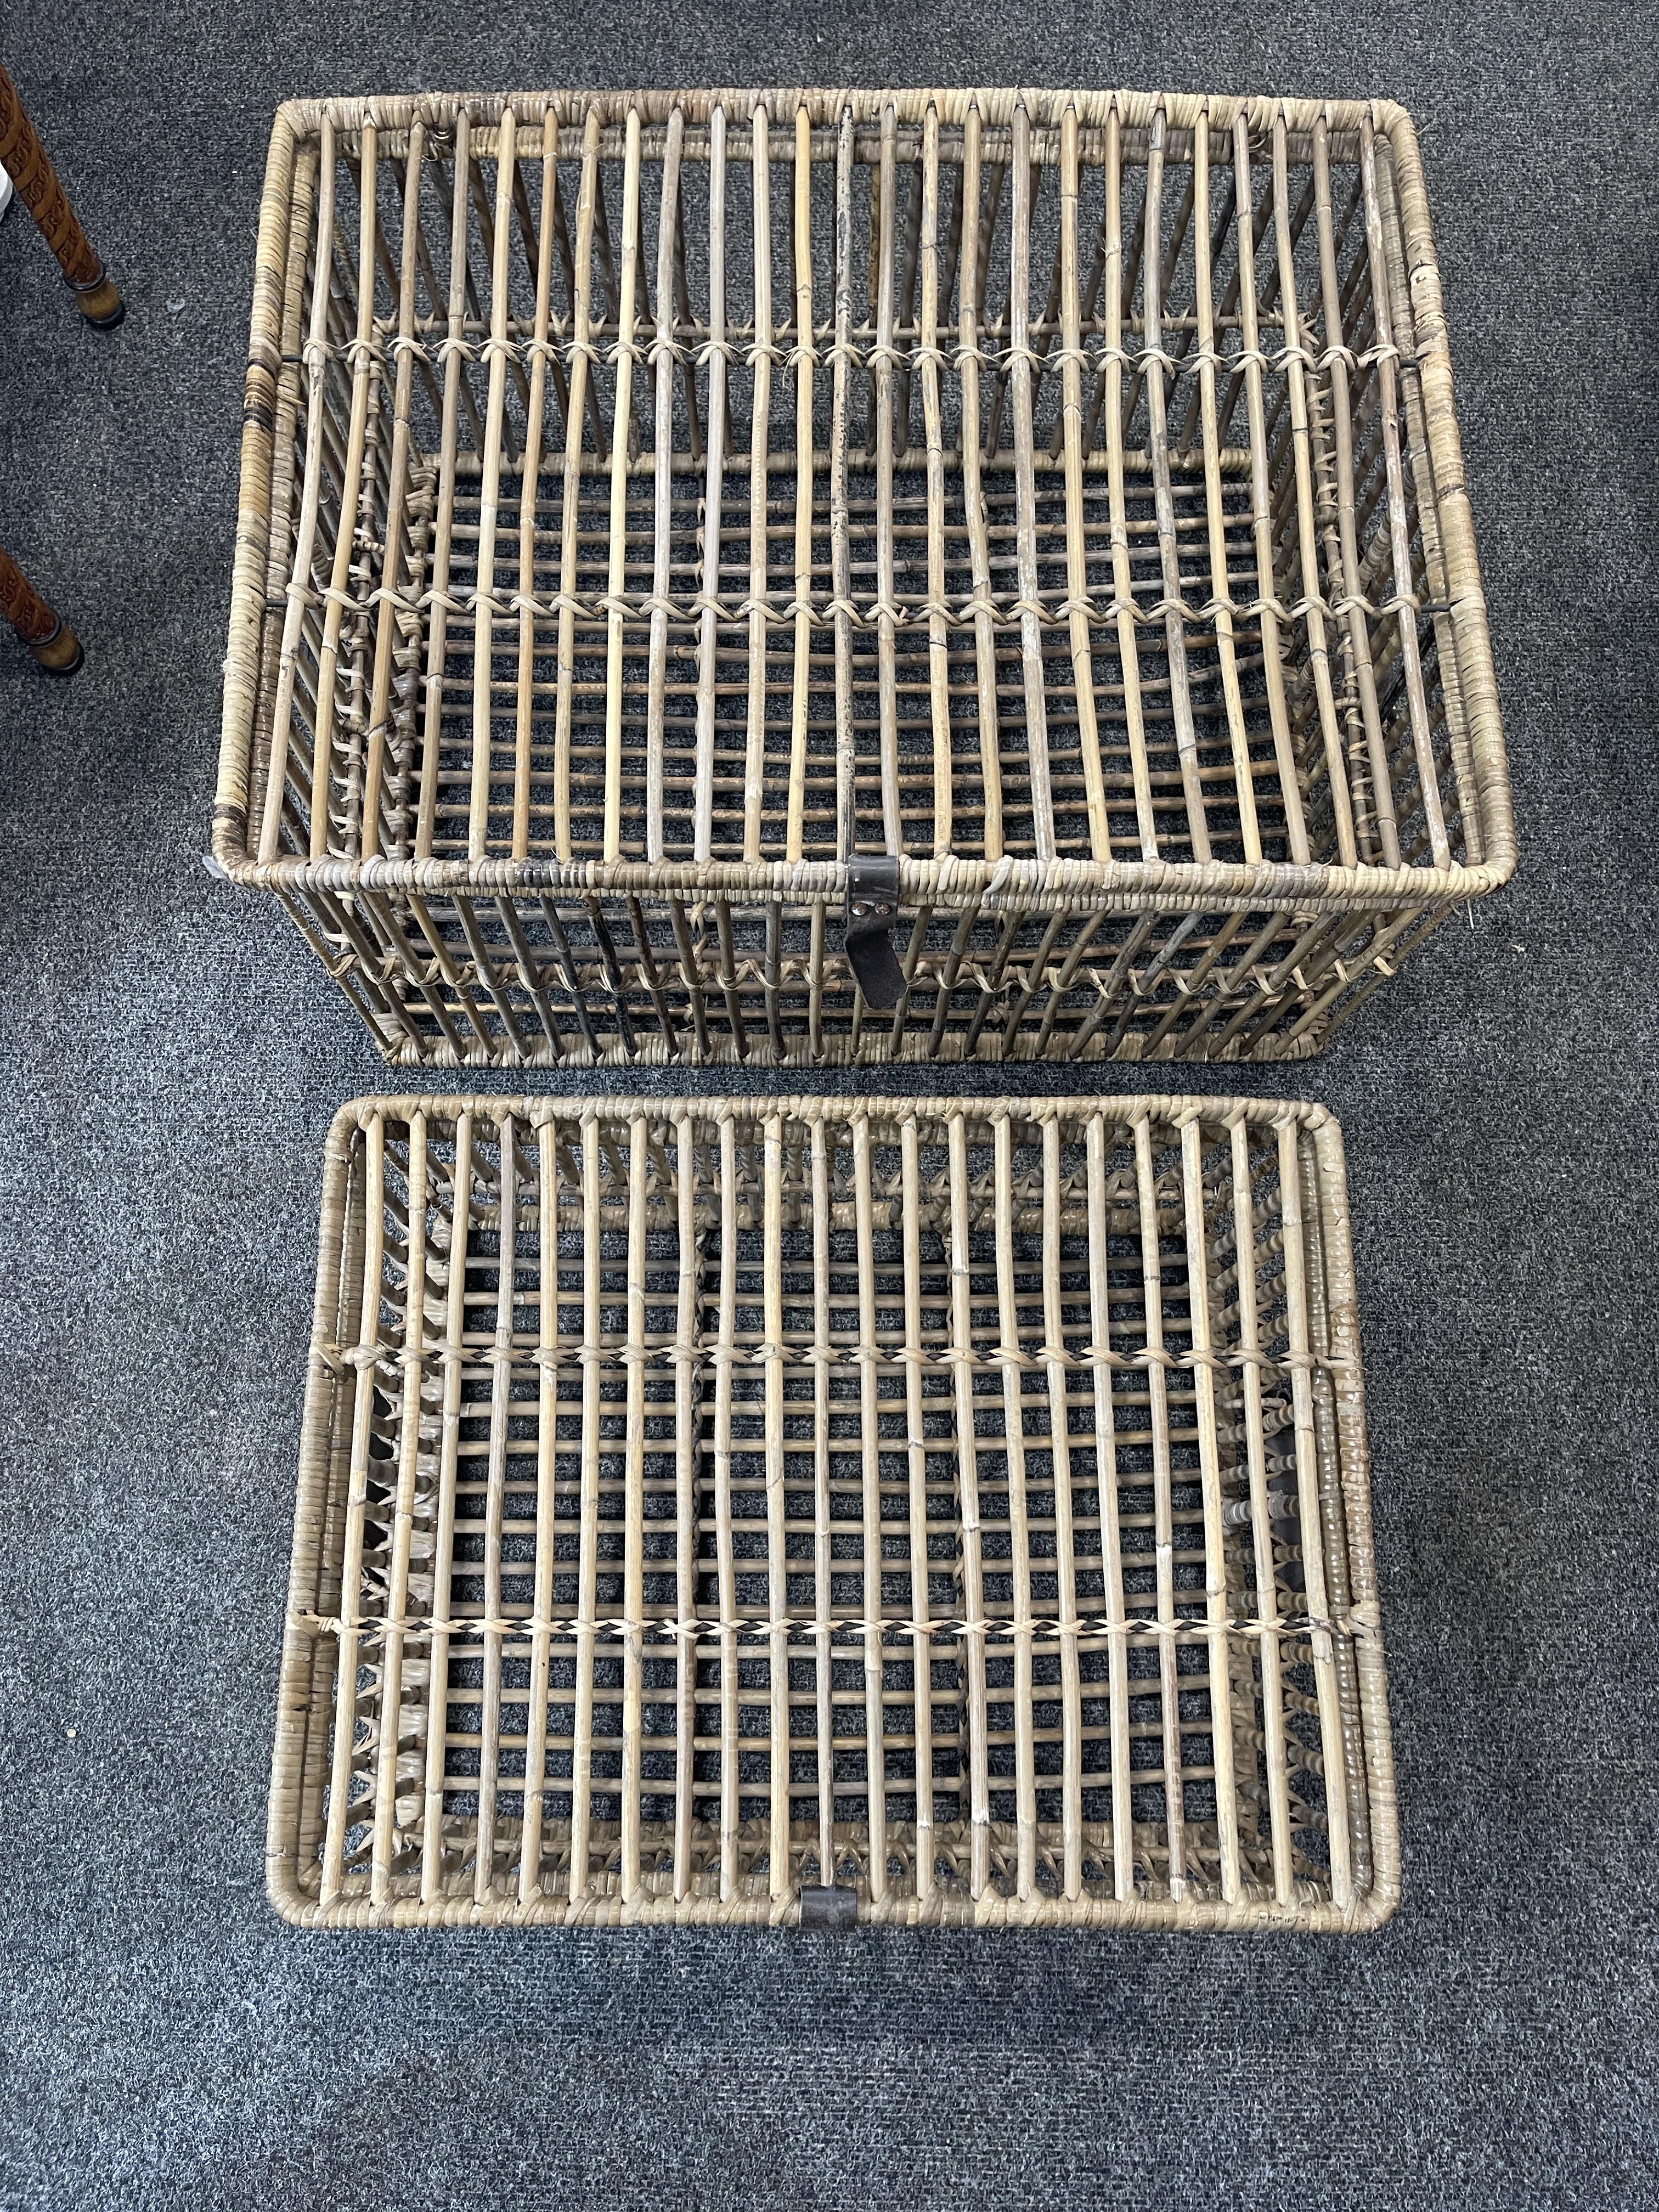 Two Large Vintage Rattan Trunks. - Image 2 of 10